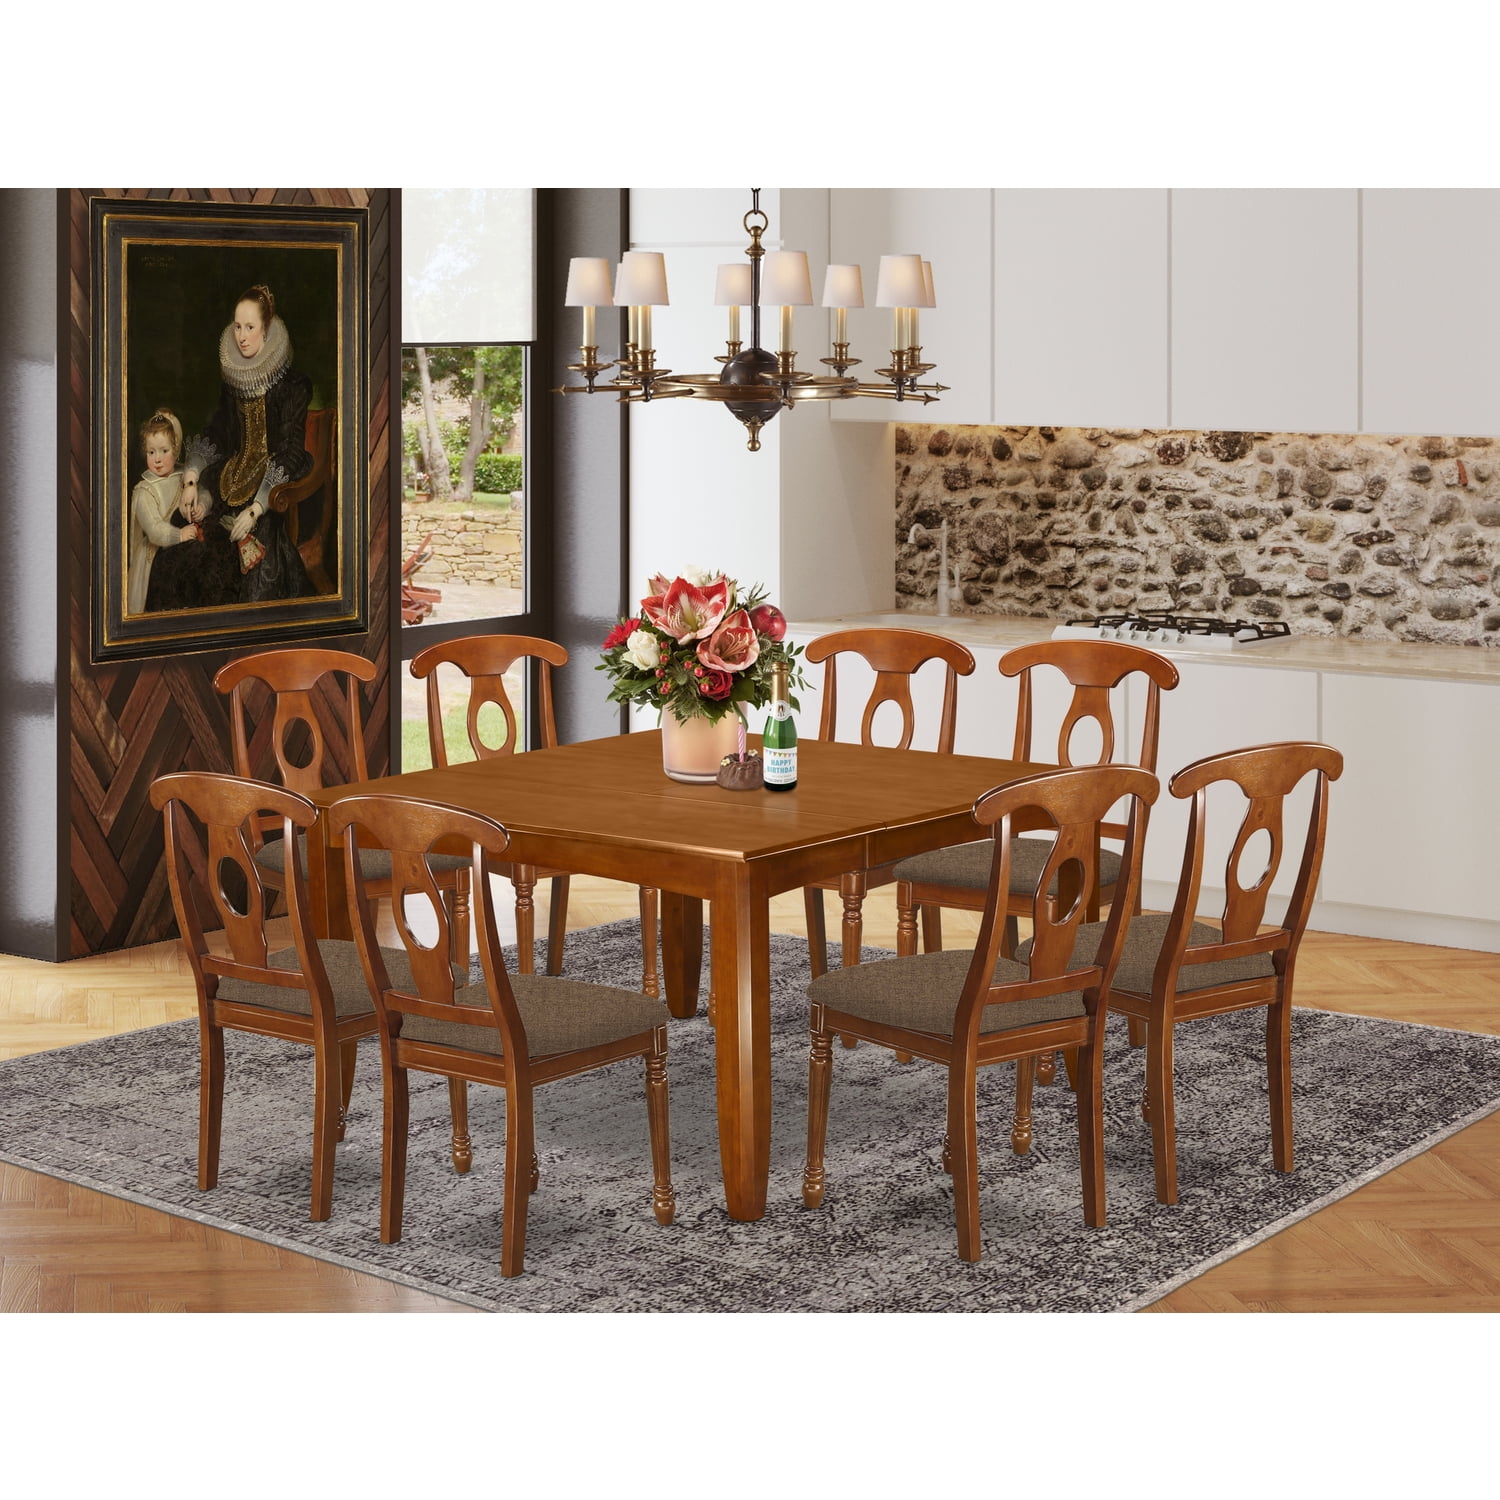 Cheap Dining Room Set-Table With Leaf And Dinette Chairs-Finish:Saddle Brown,Number of Items:9,Shape:Square,Style:Microfiber Seat